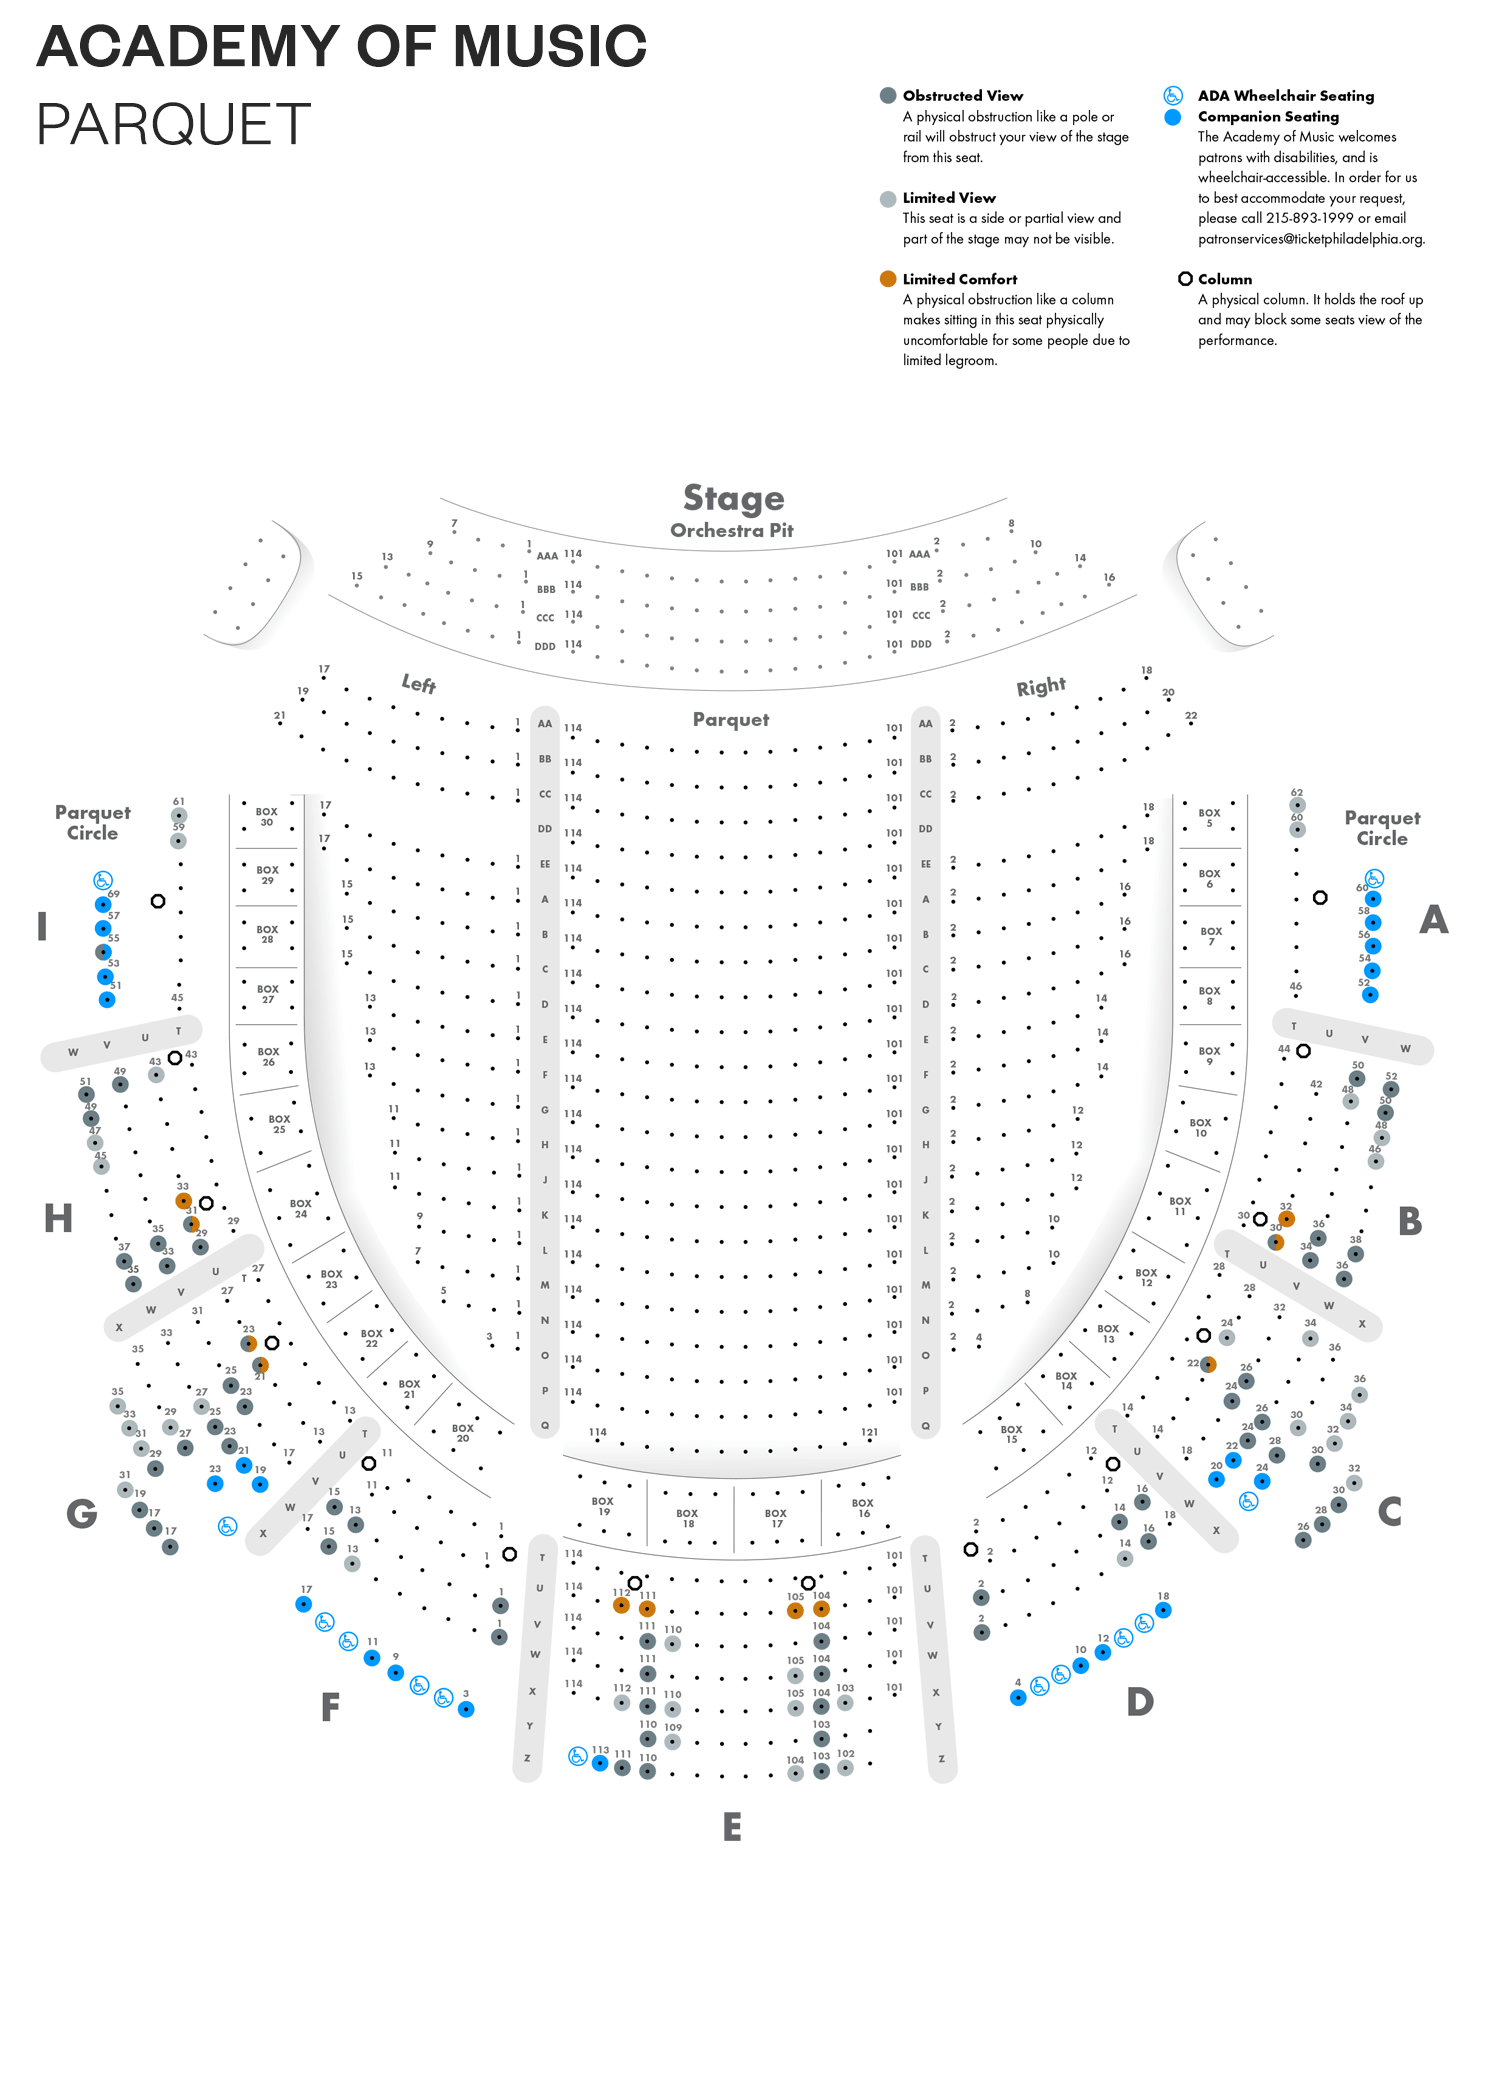 Academy of Music - Parquet - Seating Chart